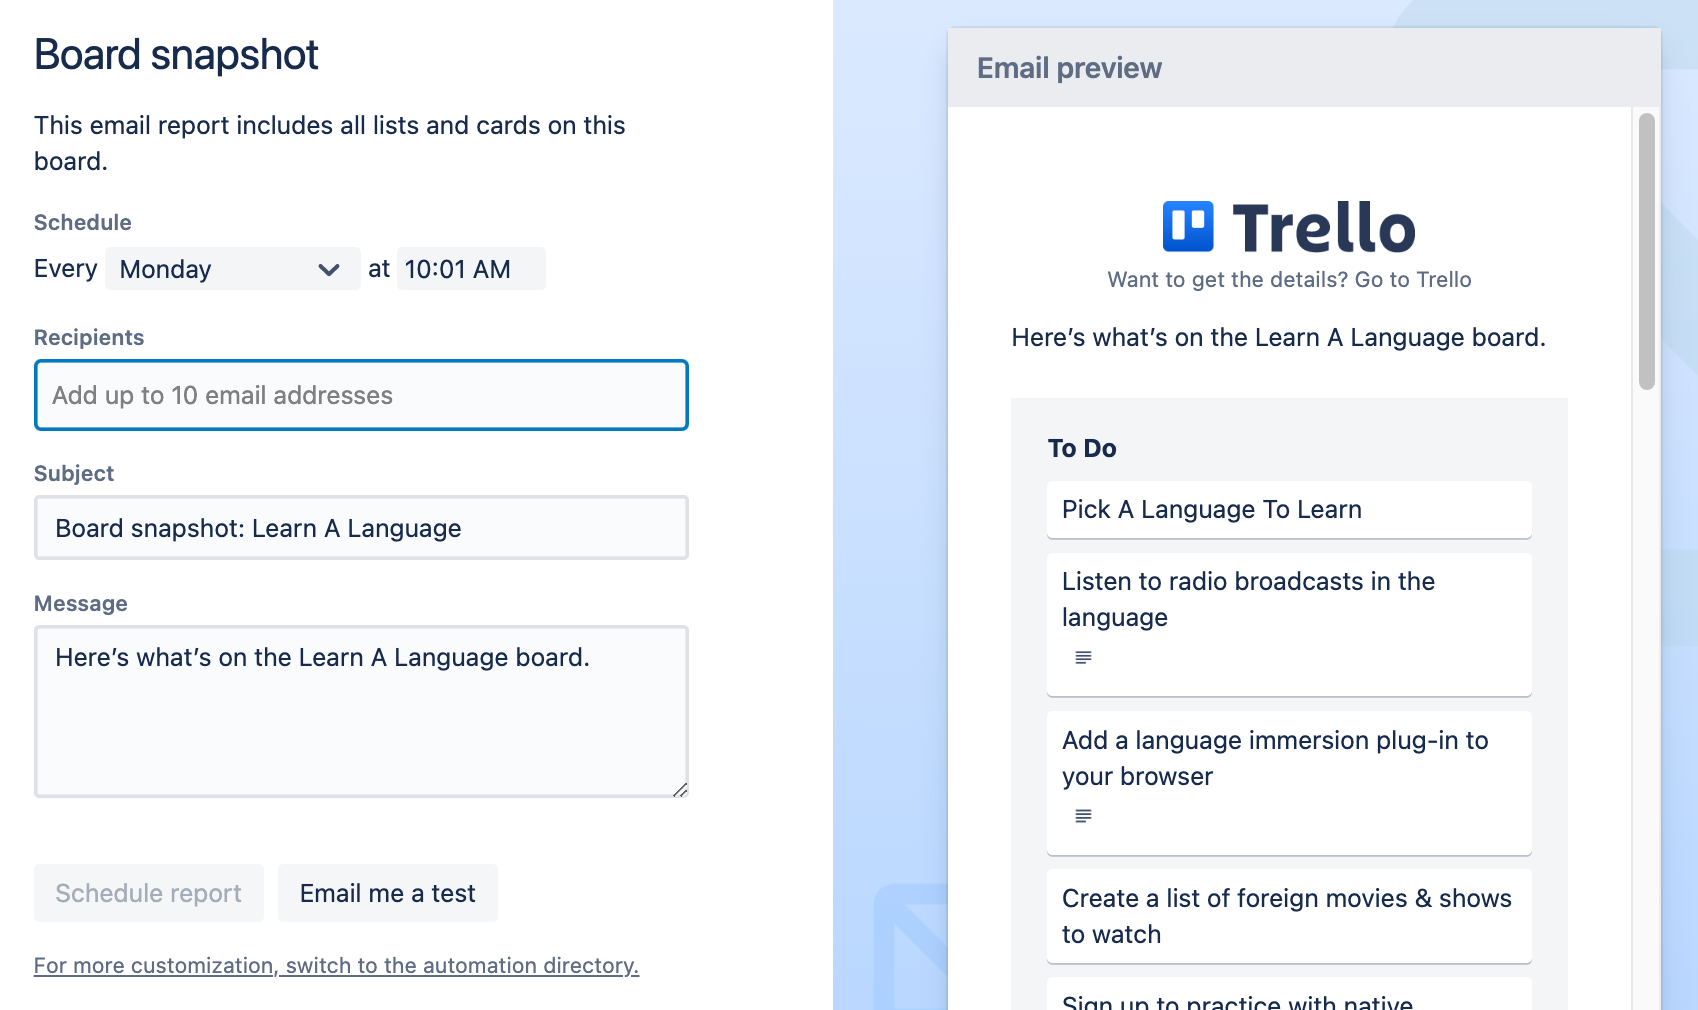 Configure visual email report for Trello using Butler